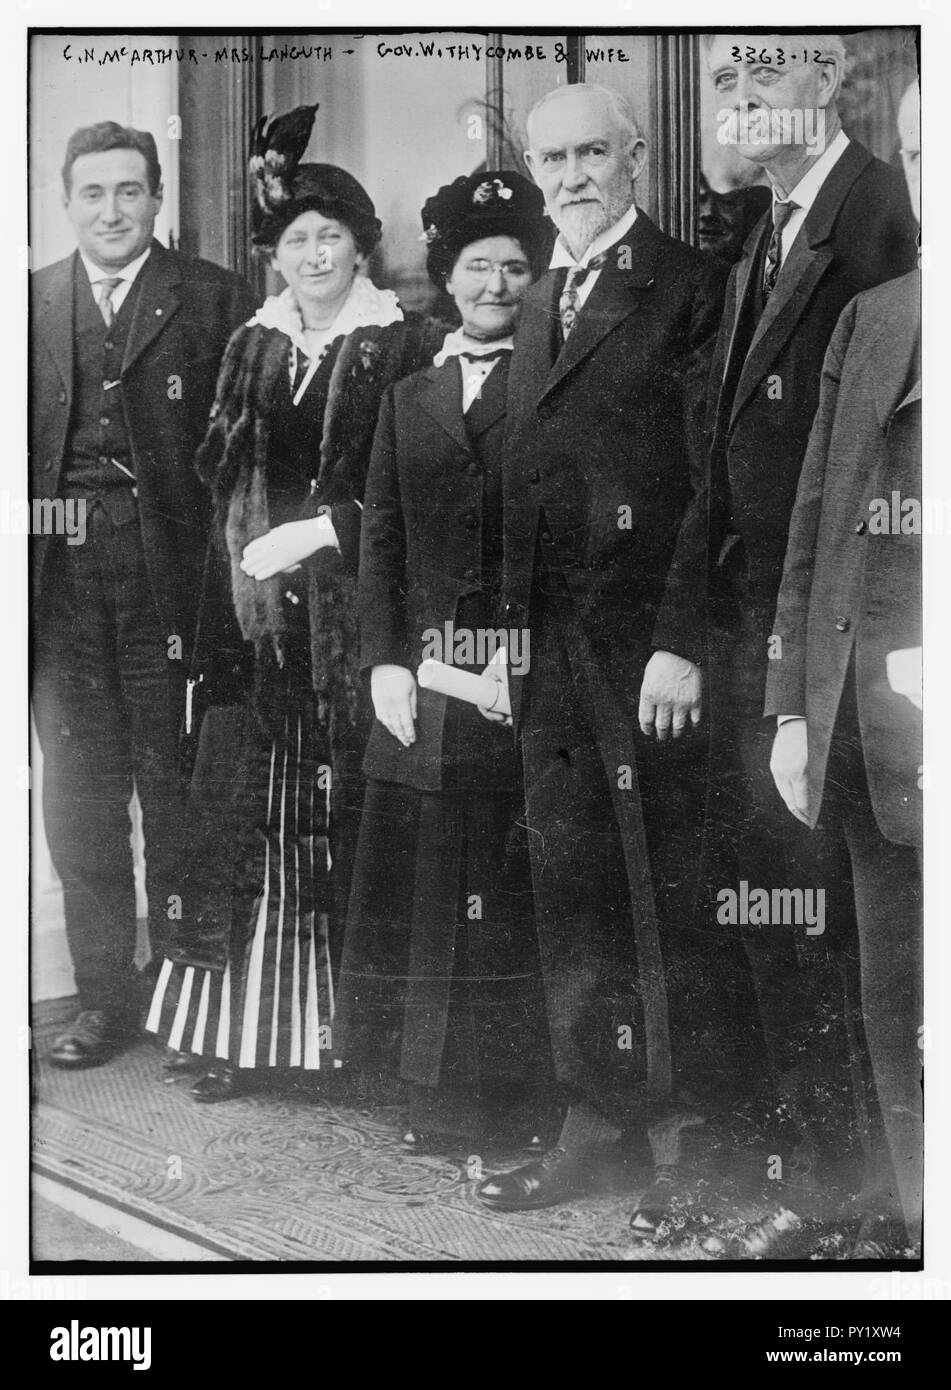 C.N. McArthur - Mrs. Languth - Gov. Withycombe and wife Stock Photo